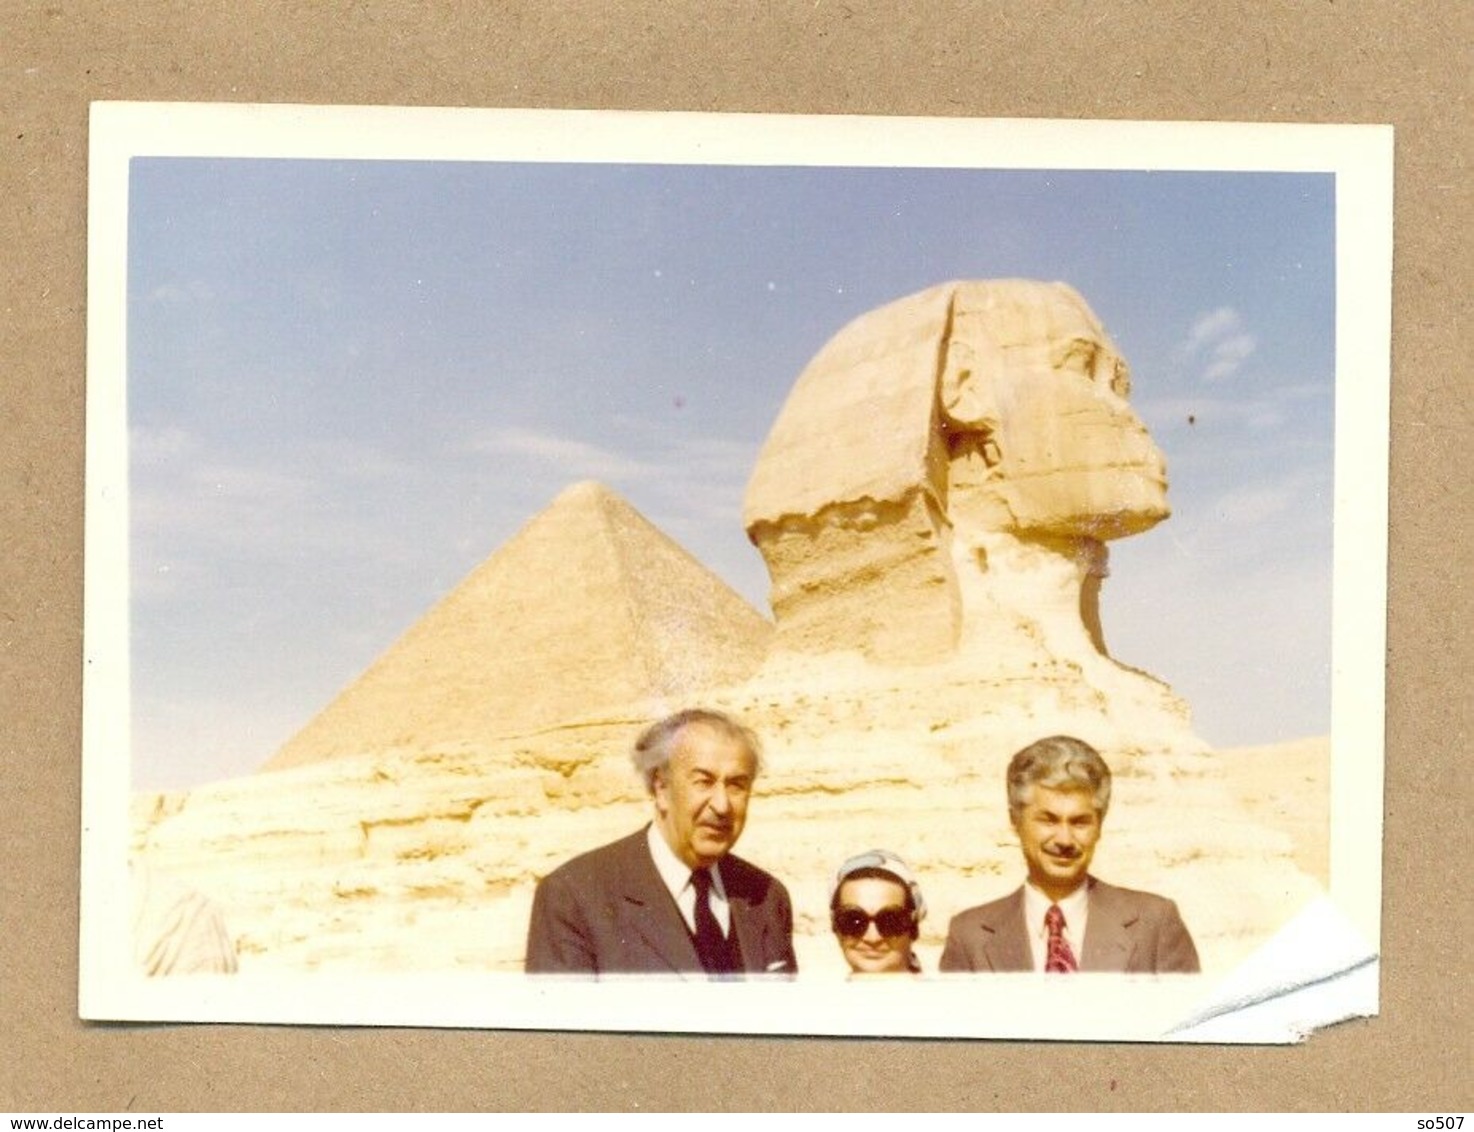 W23-Two Men,girl In Front Of Pyramid,Sphinx,Egypt-Out Of Frame-Vintage Photo Snapshot - Africa